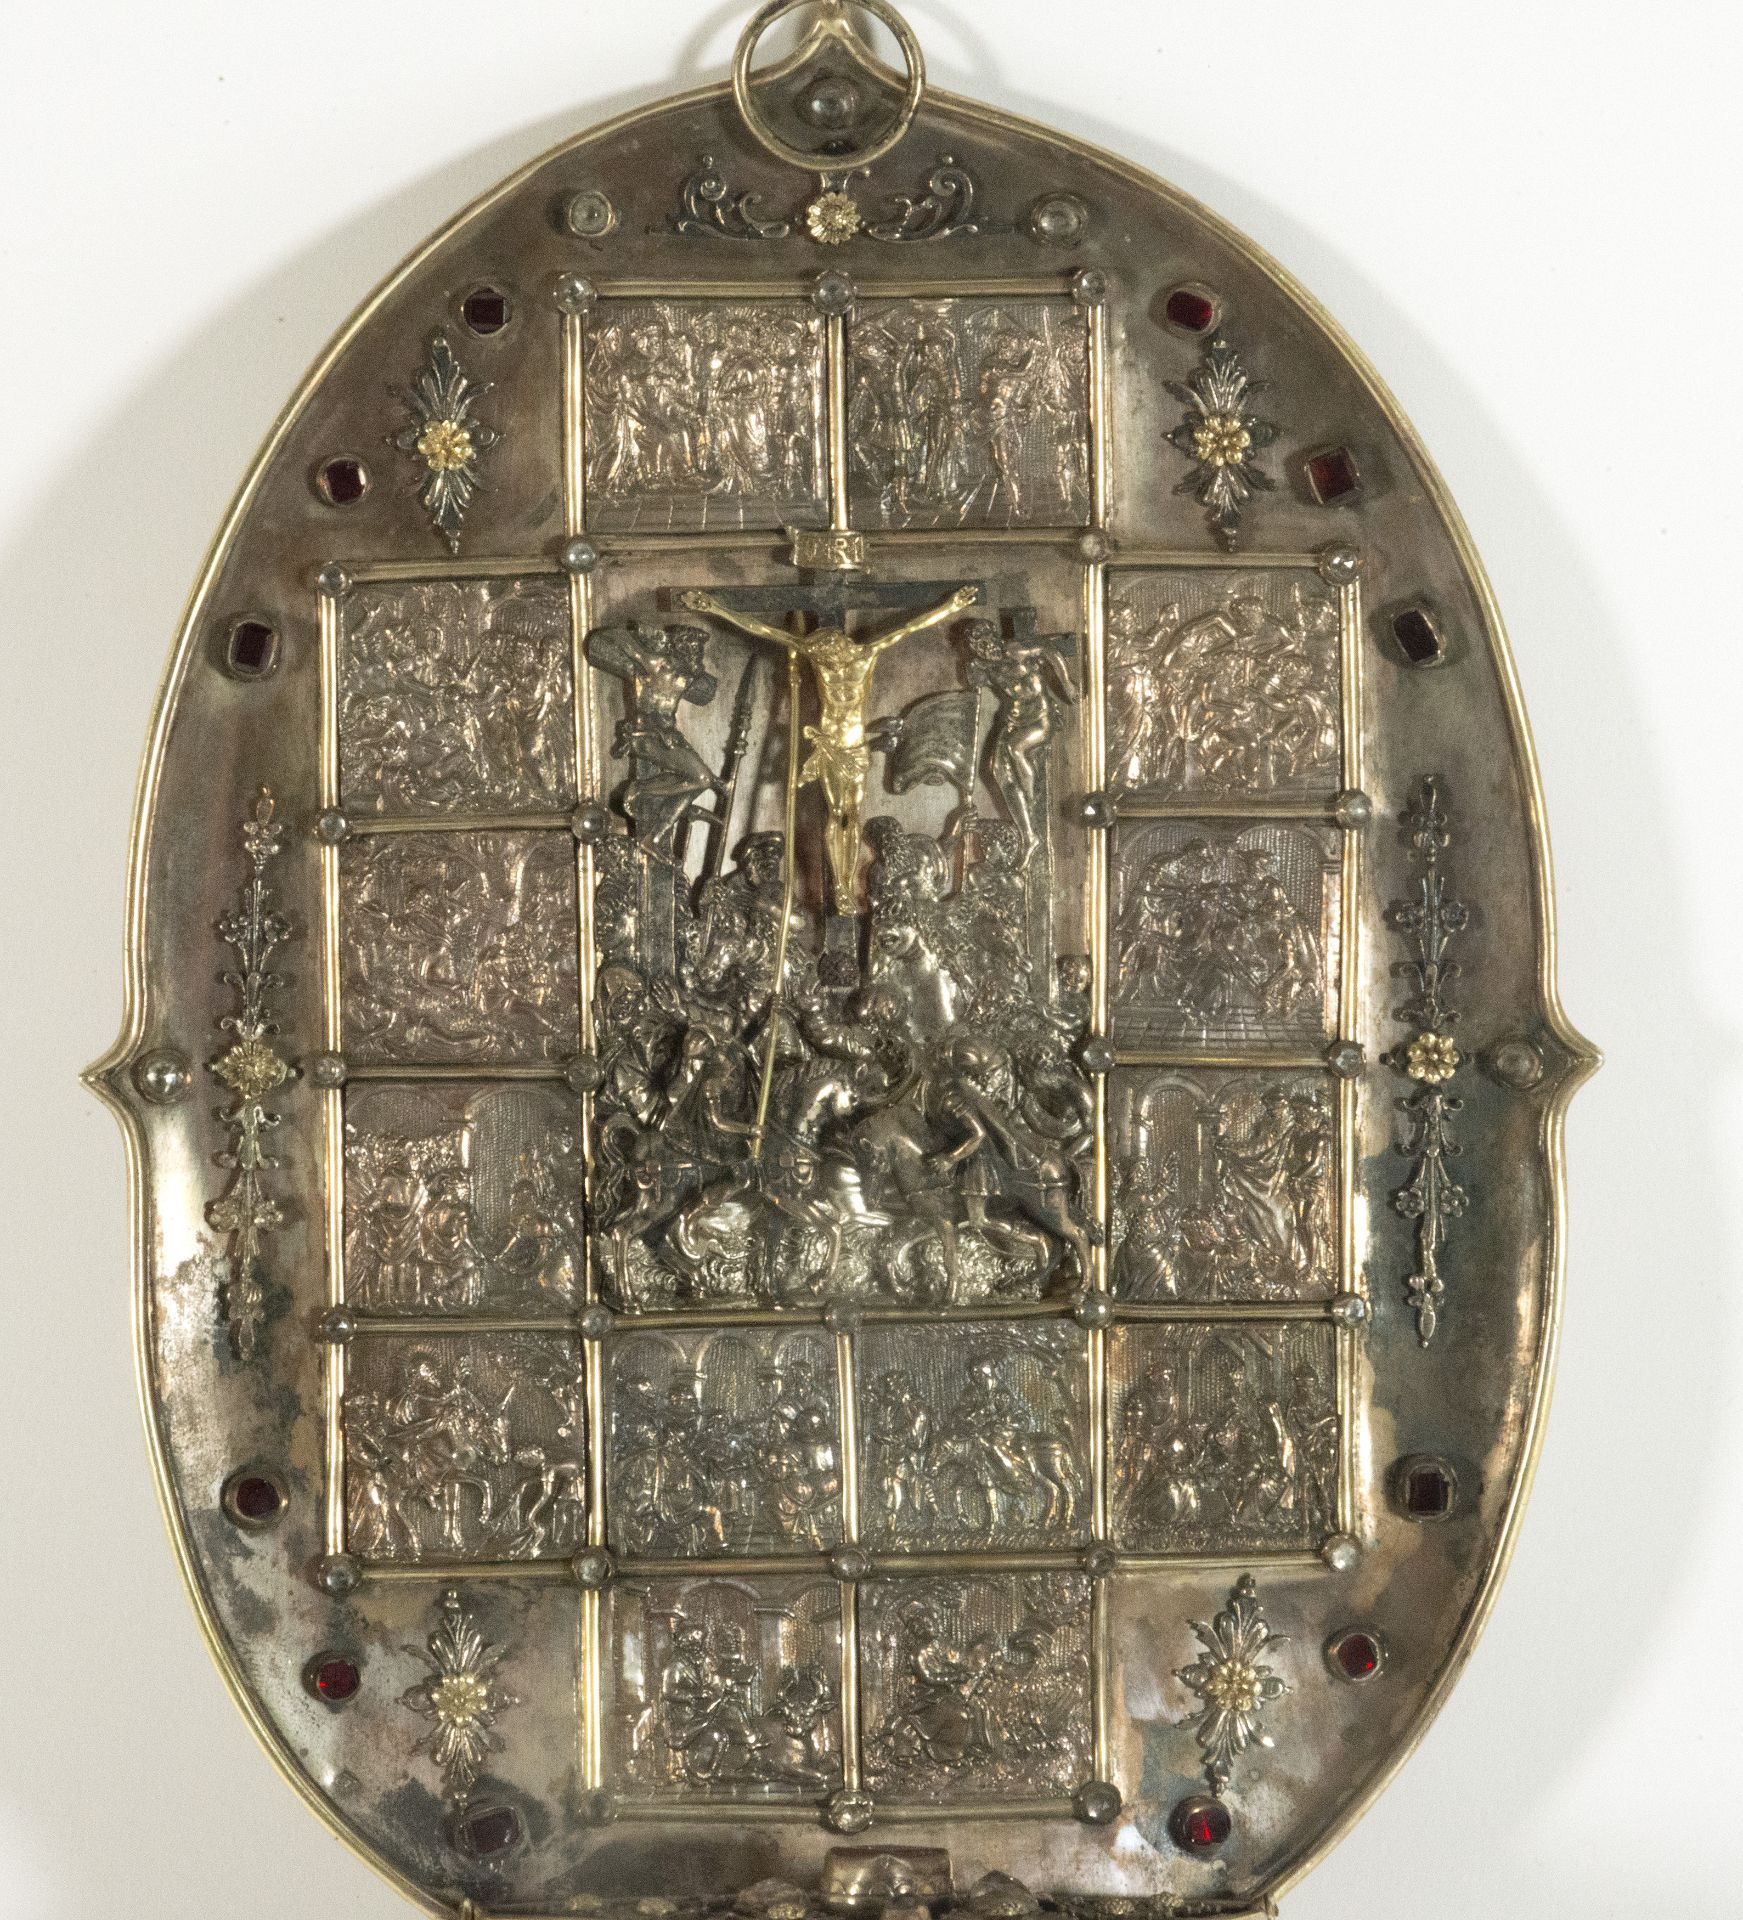 Exceptional Neo-Gothic Benditera in silver and gilded silver of Austrian Law from the end of the 19t - Bild 2 aus 6